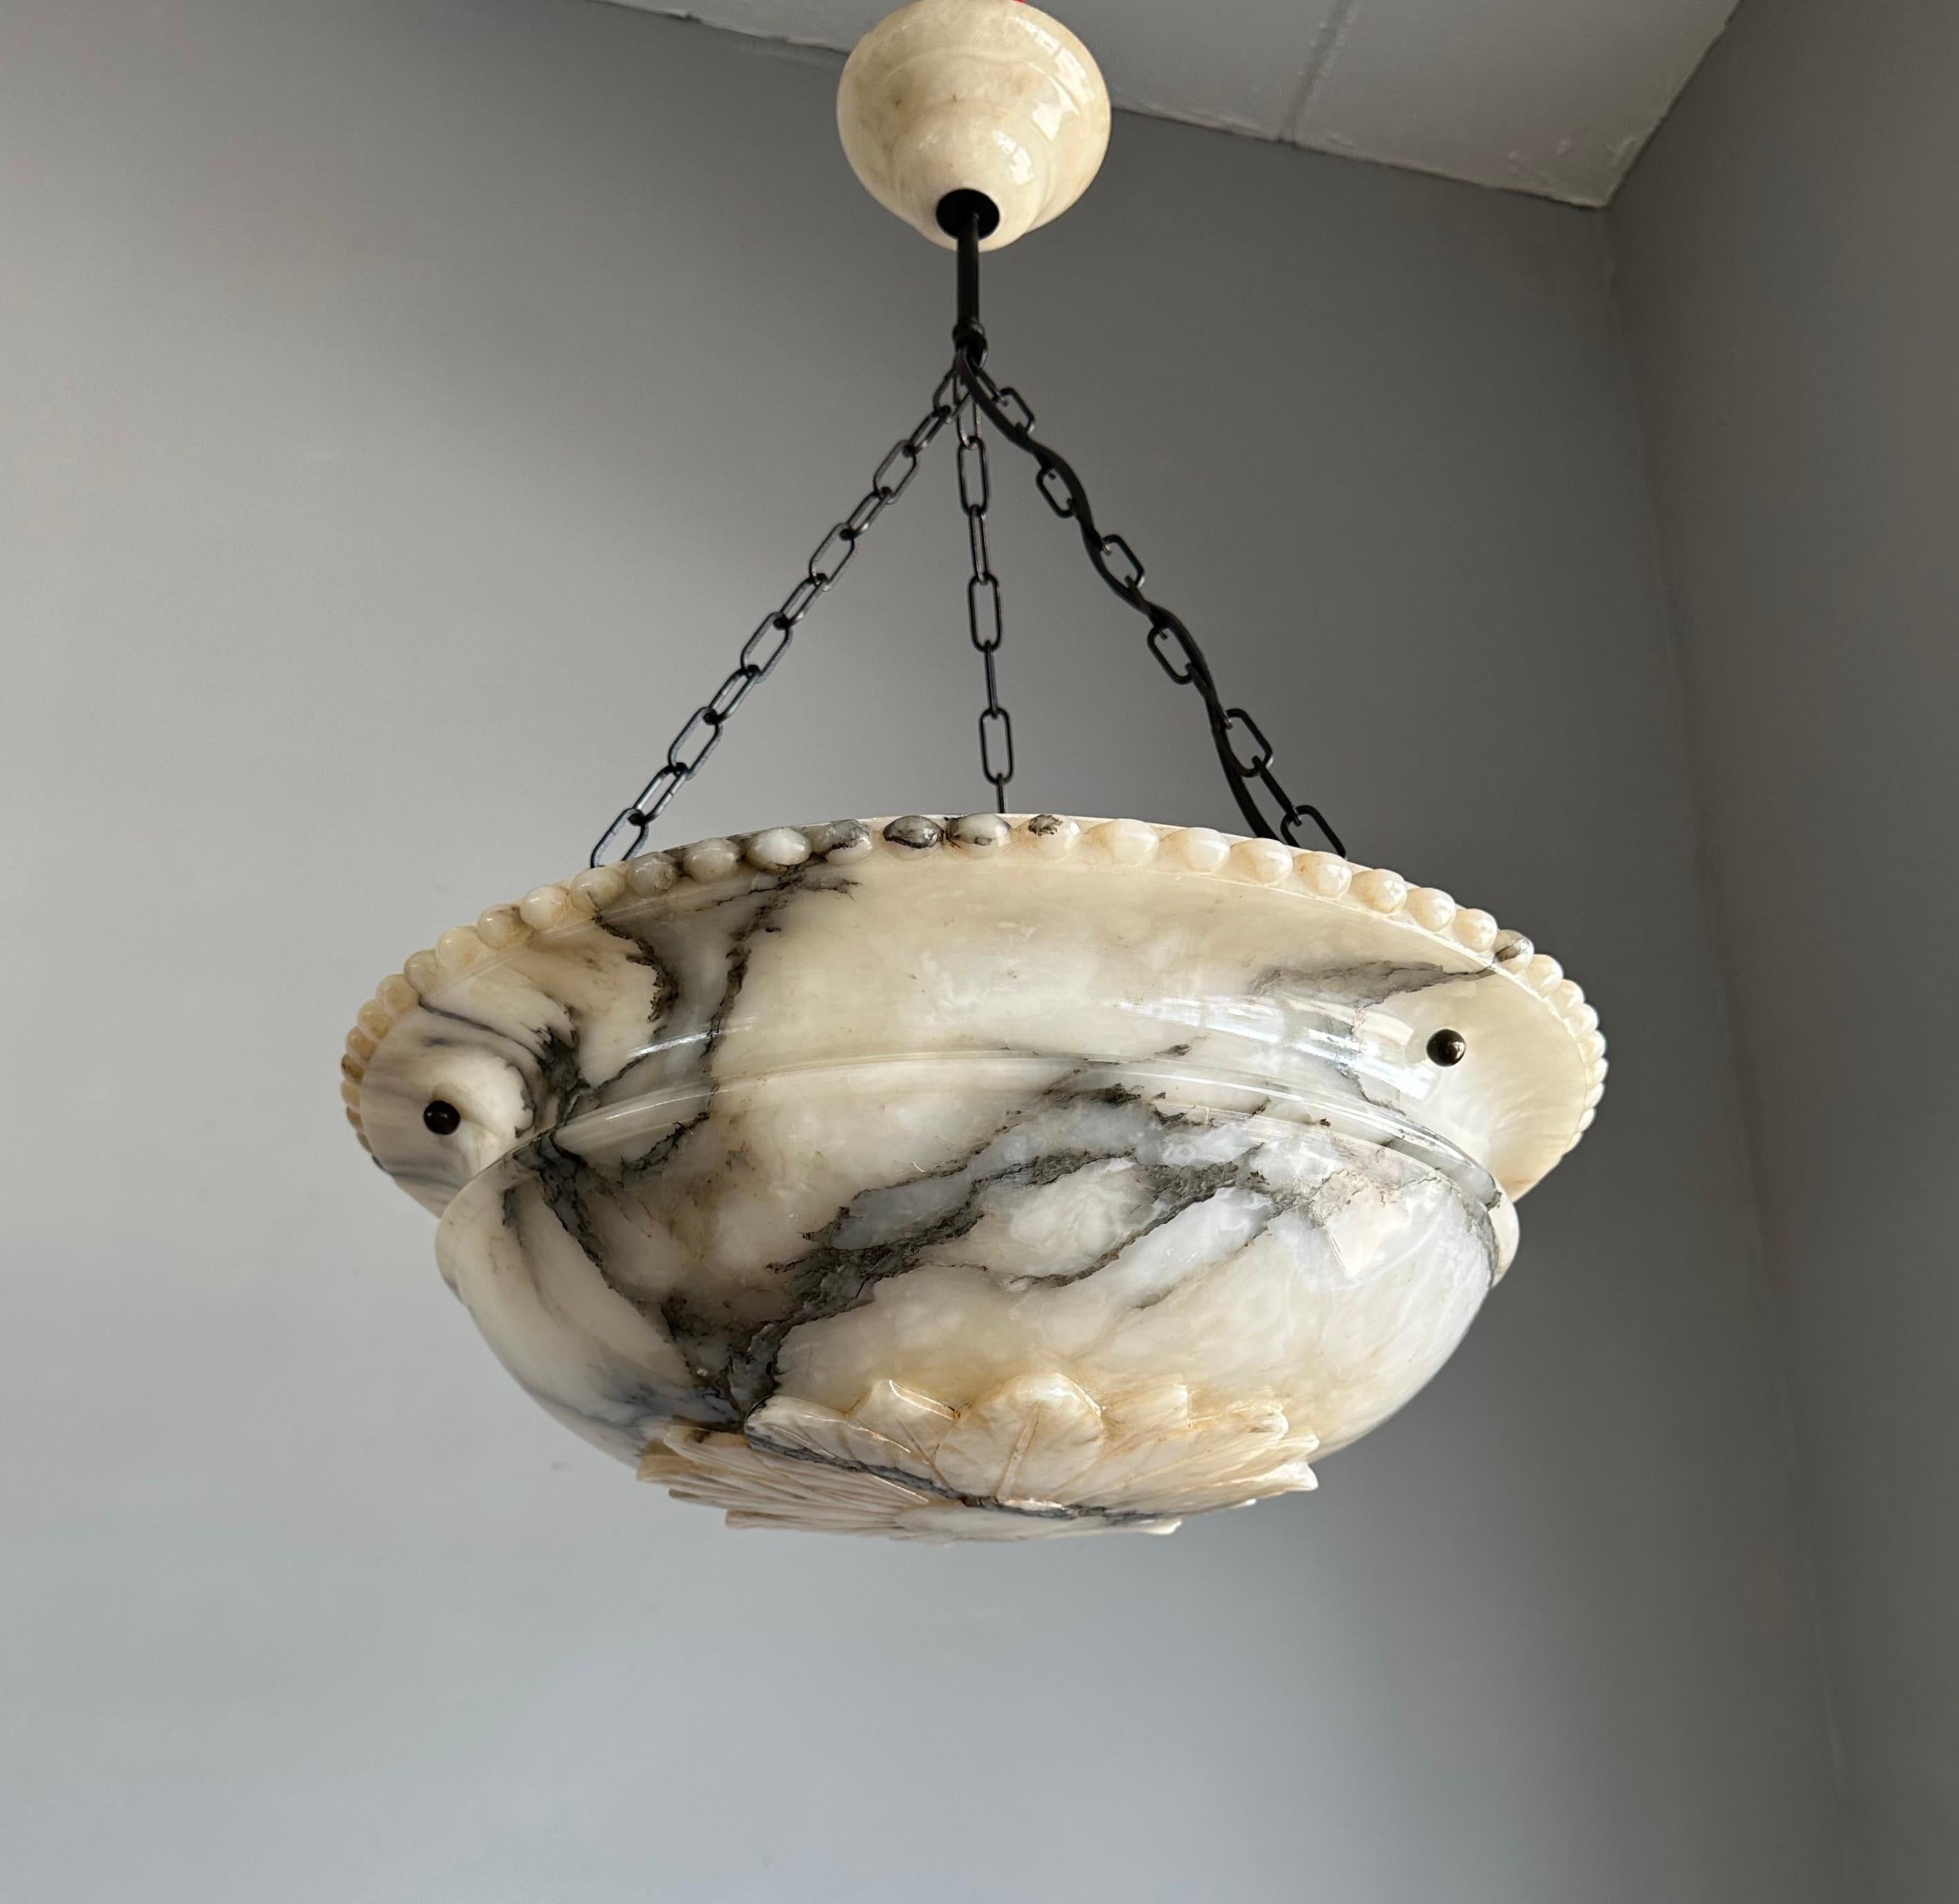 Antique 3-light chandelier with a good size and beautifully carved alabaster shade.

Thanks to its size, its deep bowl shade, its classical design and beautifully spread black veins this great alabaster chandelier is bound to light up someone's days